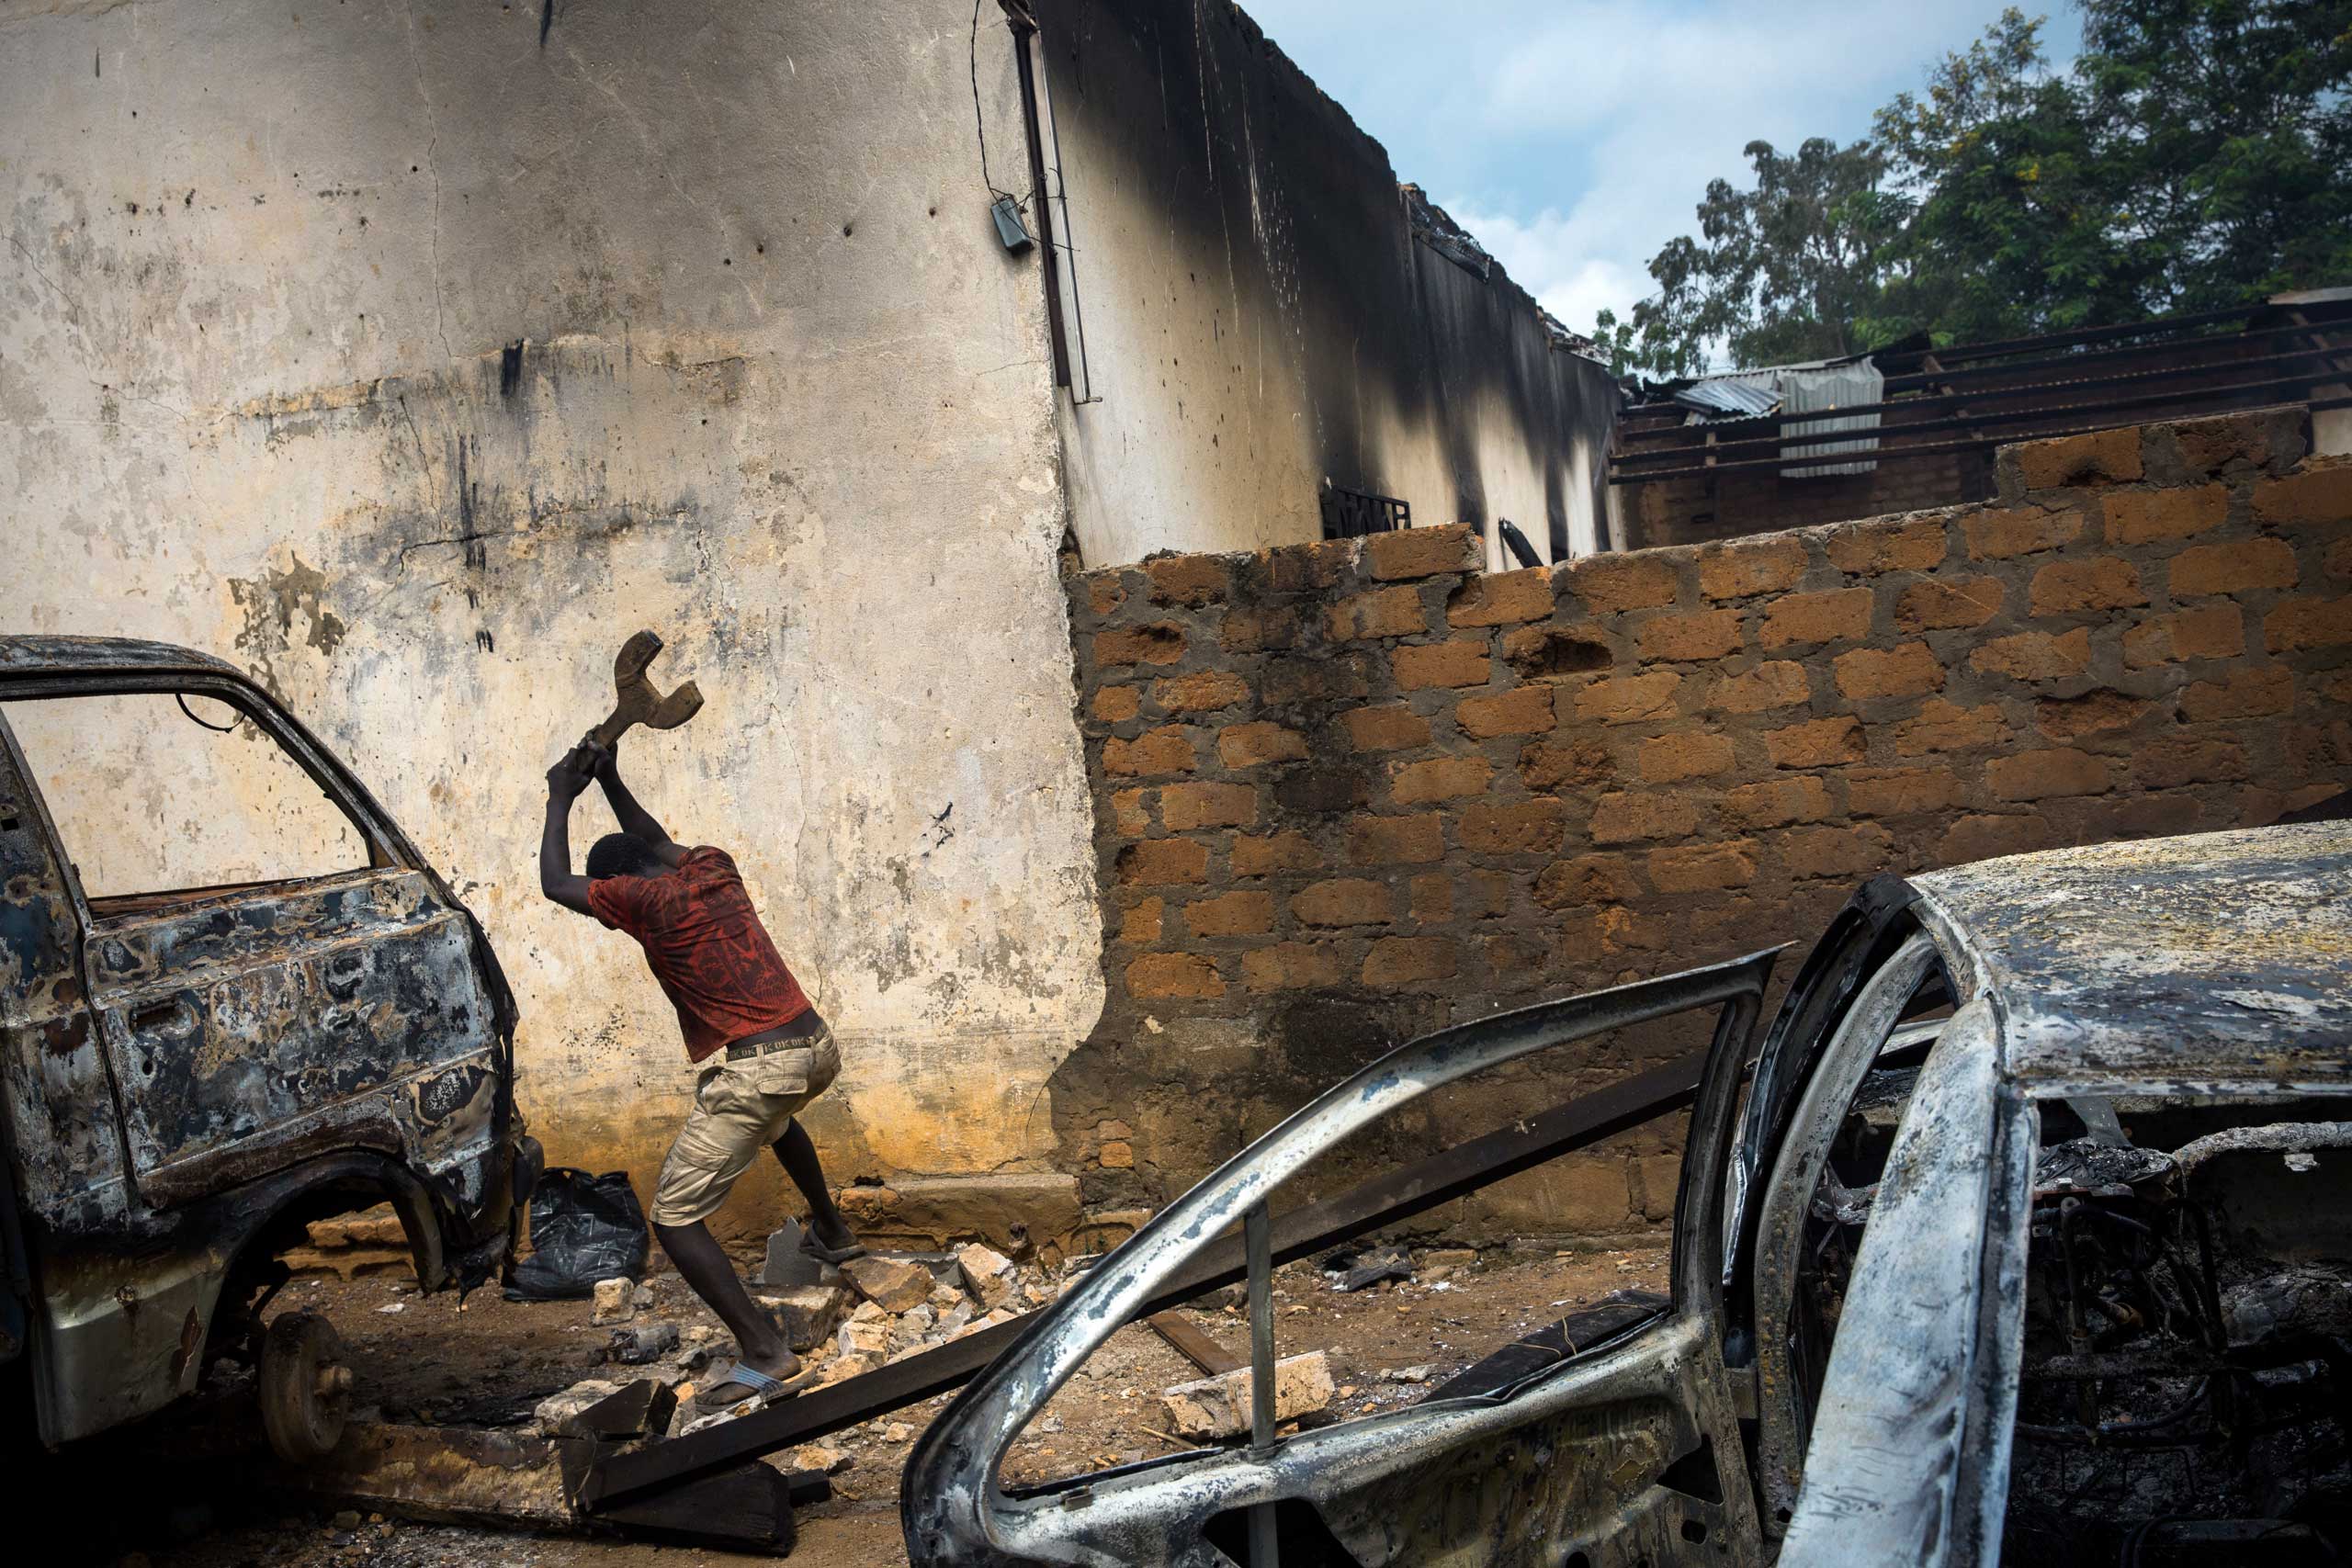 A Christian man destroys burnt out cars in rage, next to a looted mosque that had been set ablaze. Bangui, Central African Republic. Dec. 10, 2013. (William Daniels—Panos)